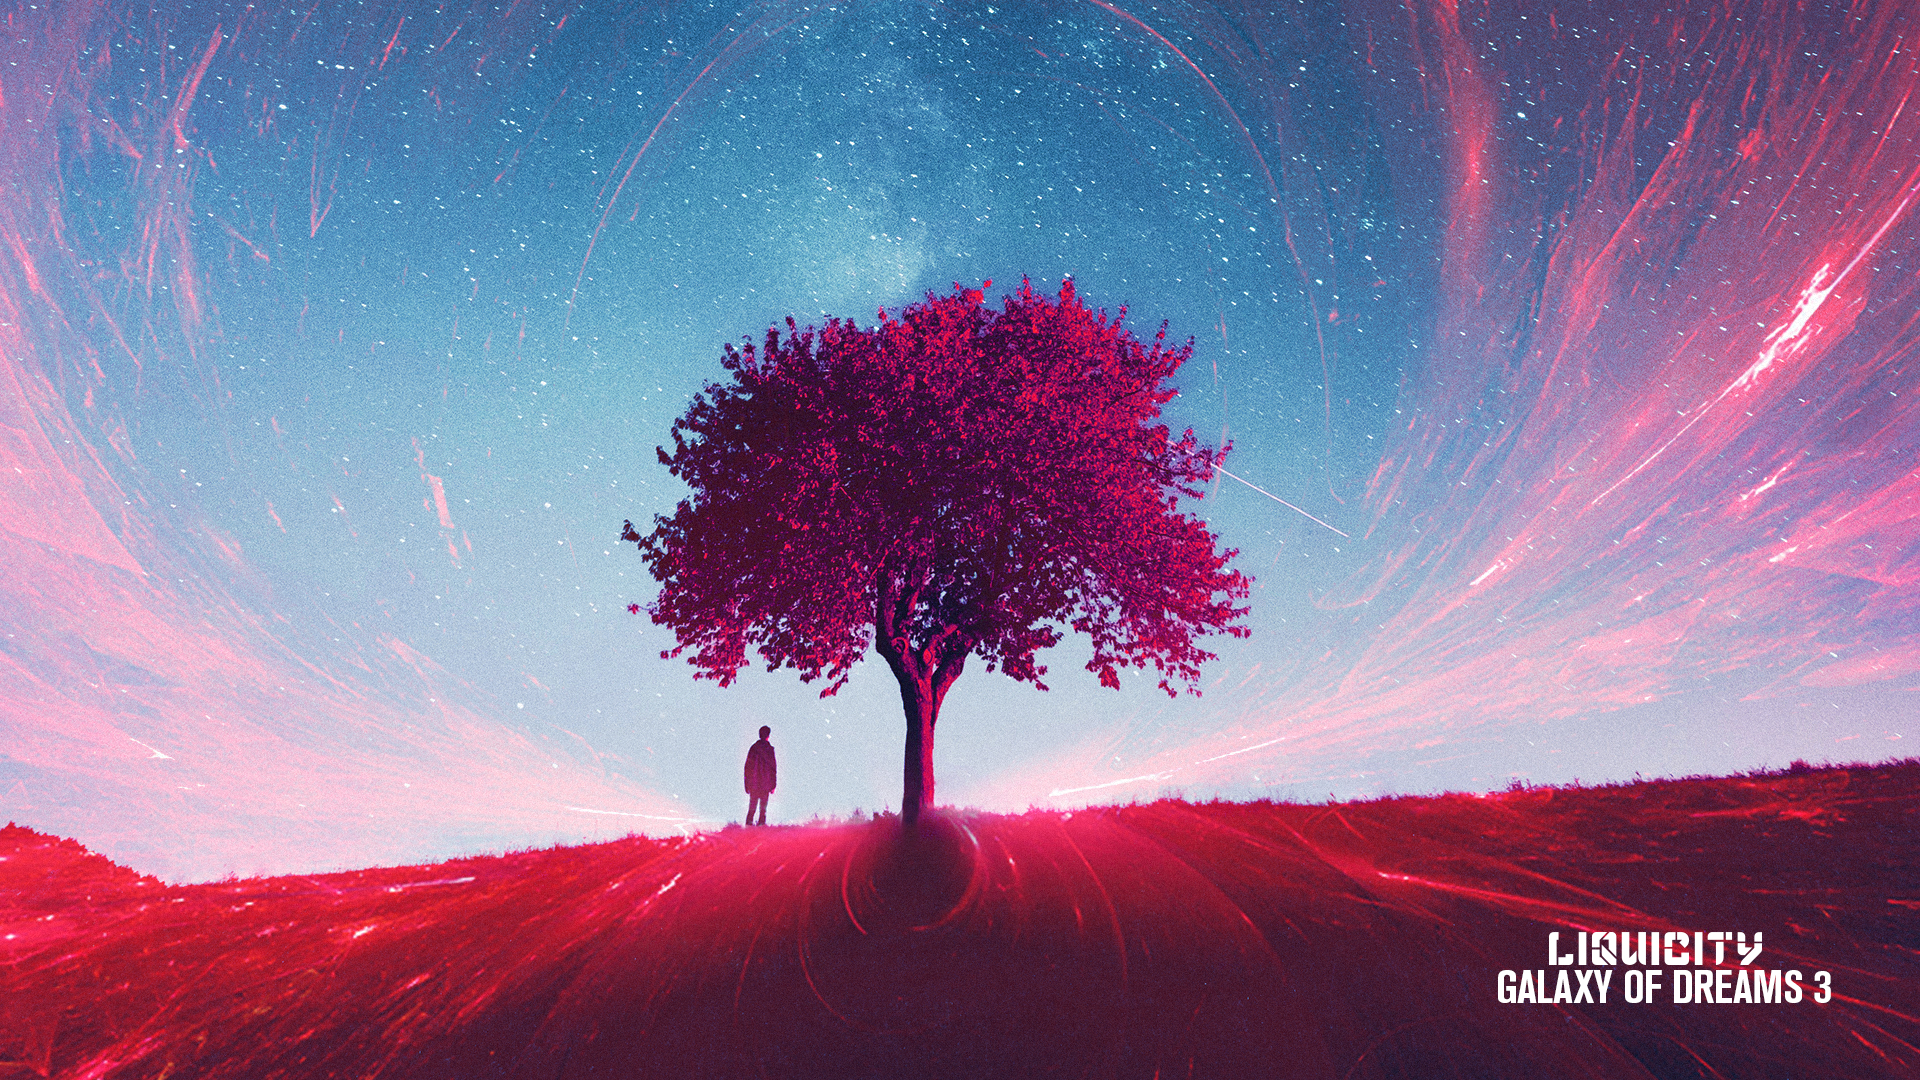 General 1920x1080 drum and bass Liquicity music digital art red trees text